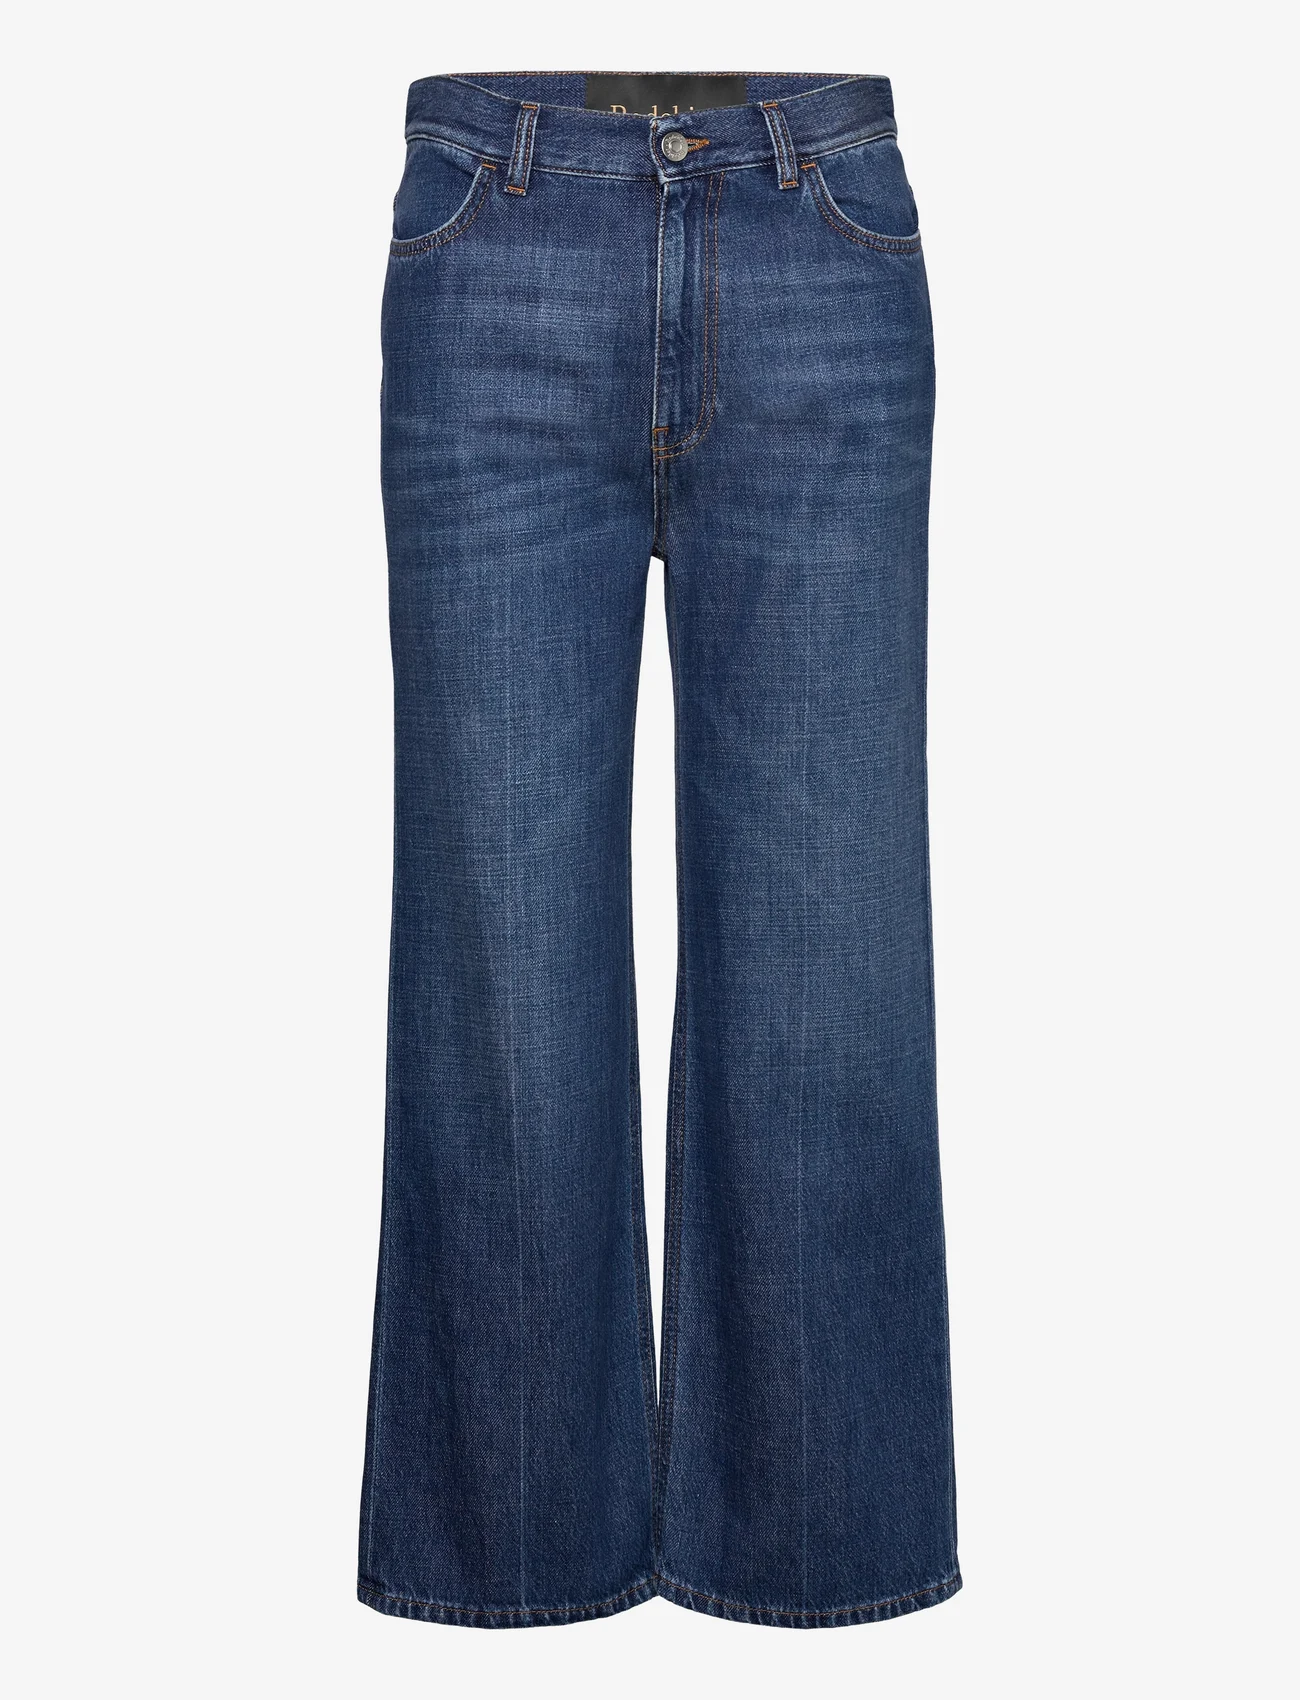 RODEBJER - Rodebjer Mini Culotte - flared jeans - indigo - 0